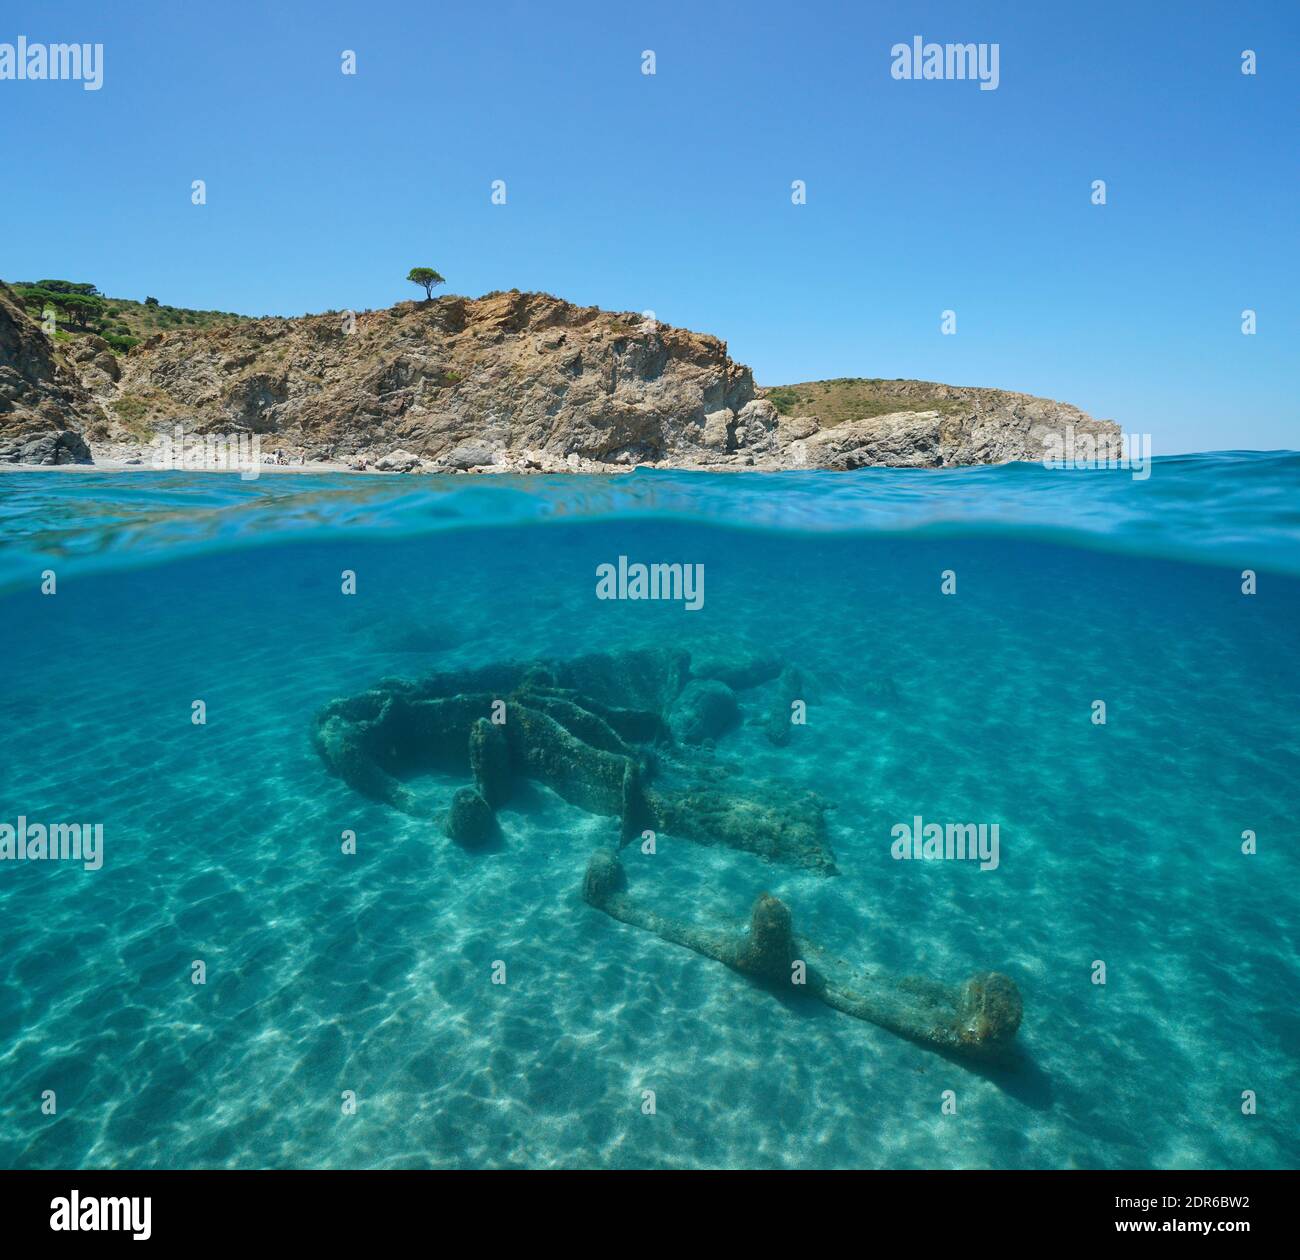 France Occitanie, rocky coast and the remains of a wrecked ship underwater, split view over and under water surface, Mediterranean sea Stock Photo